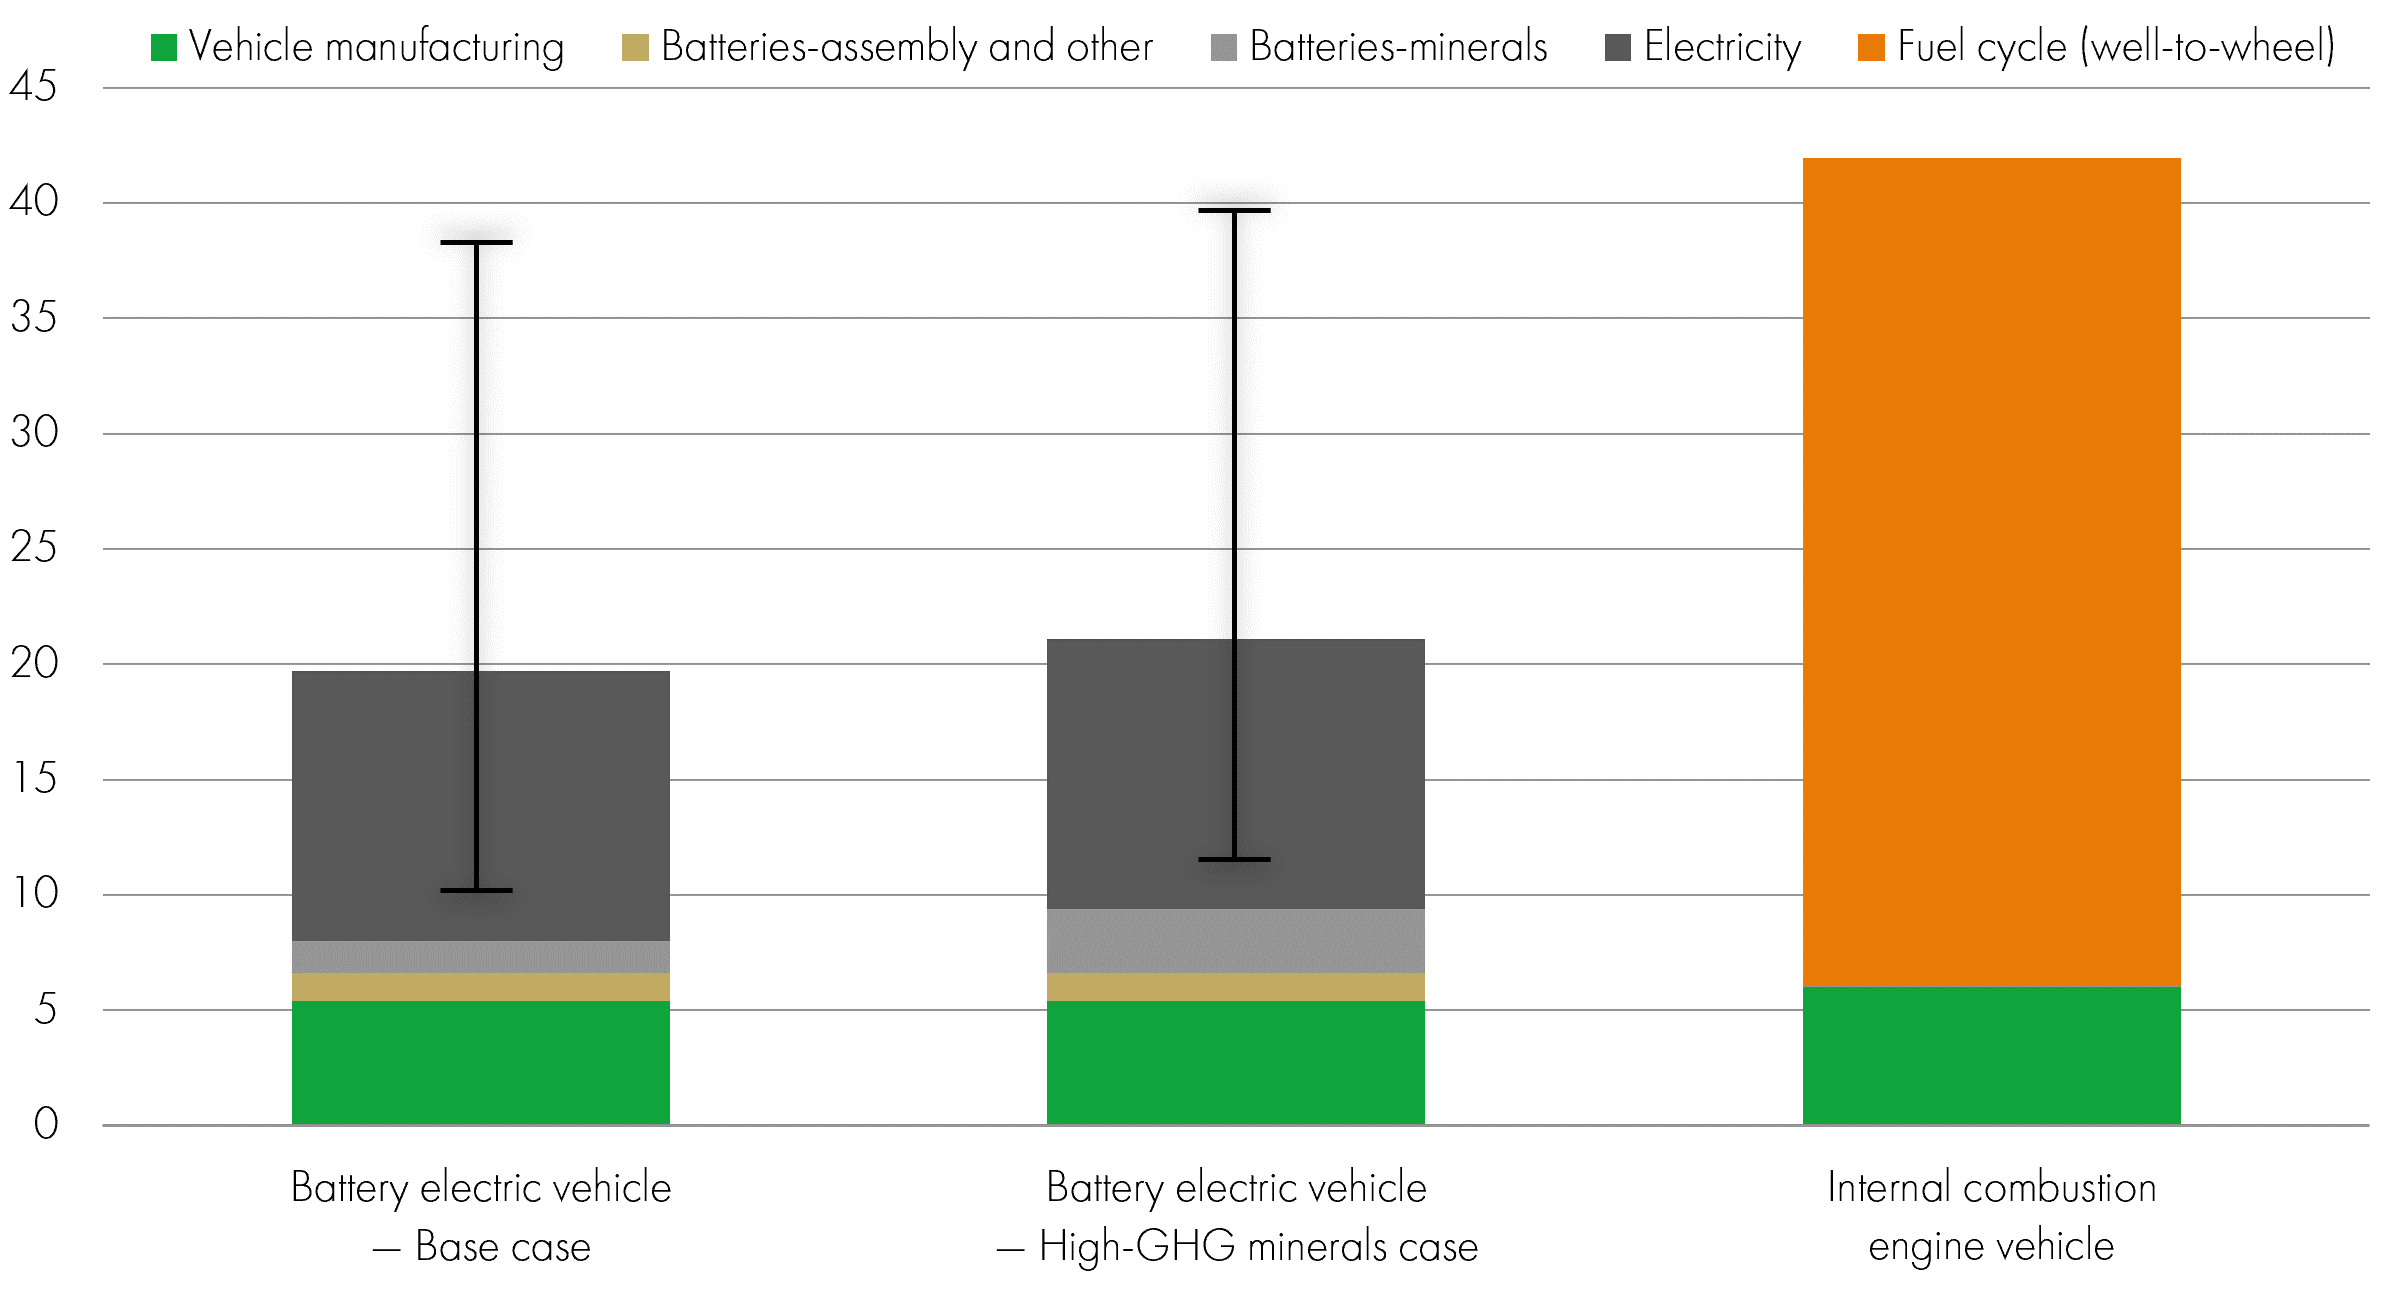 Graph showing omparative life-cycle greenhouse gas emissions of a mid-size BEV and ICE vehicle